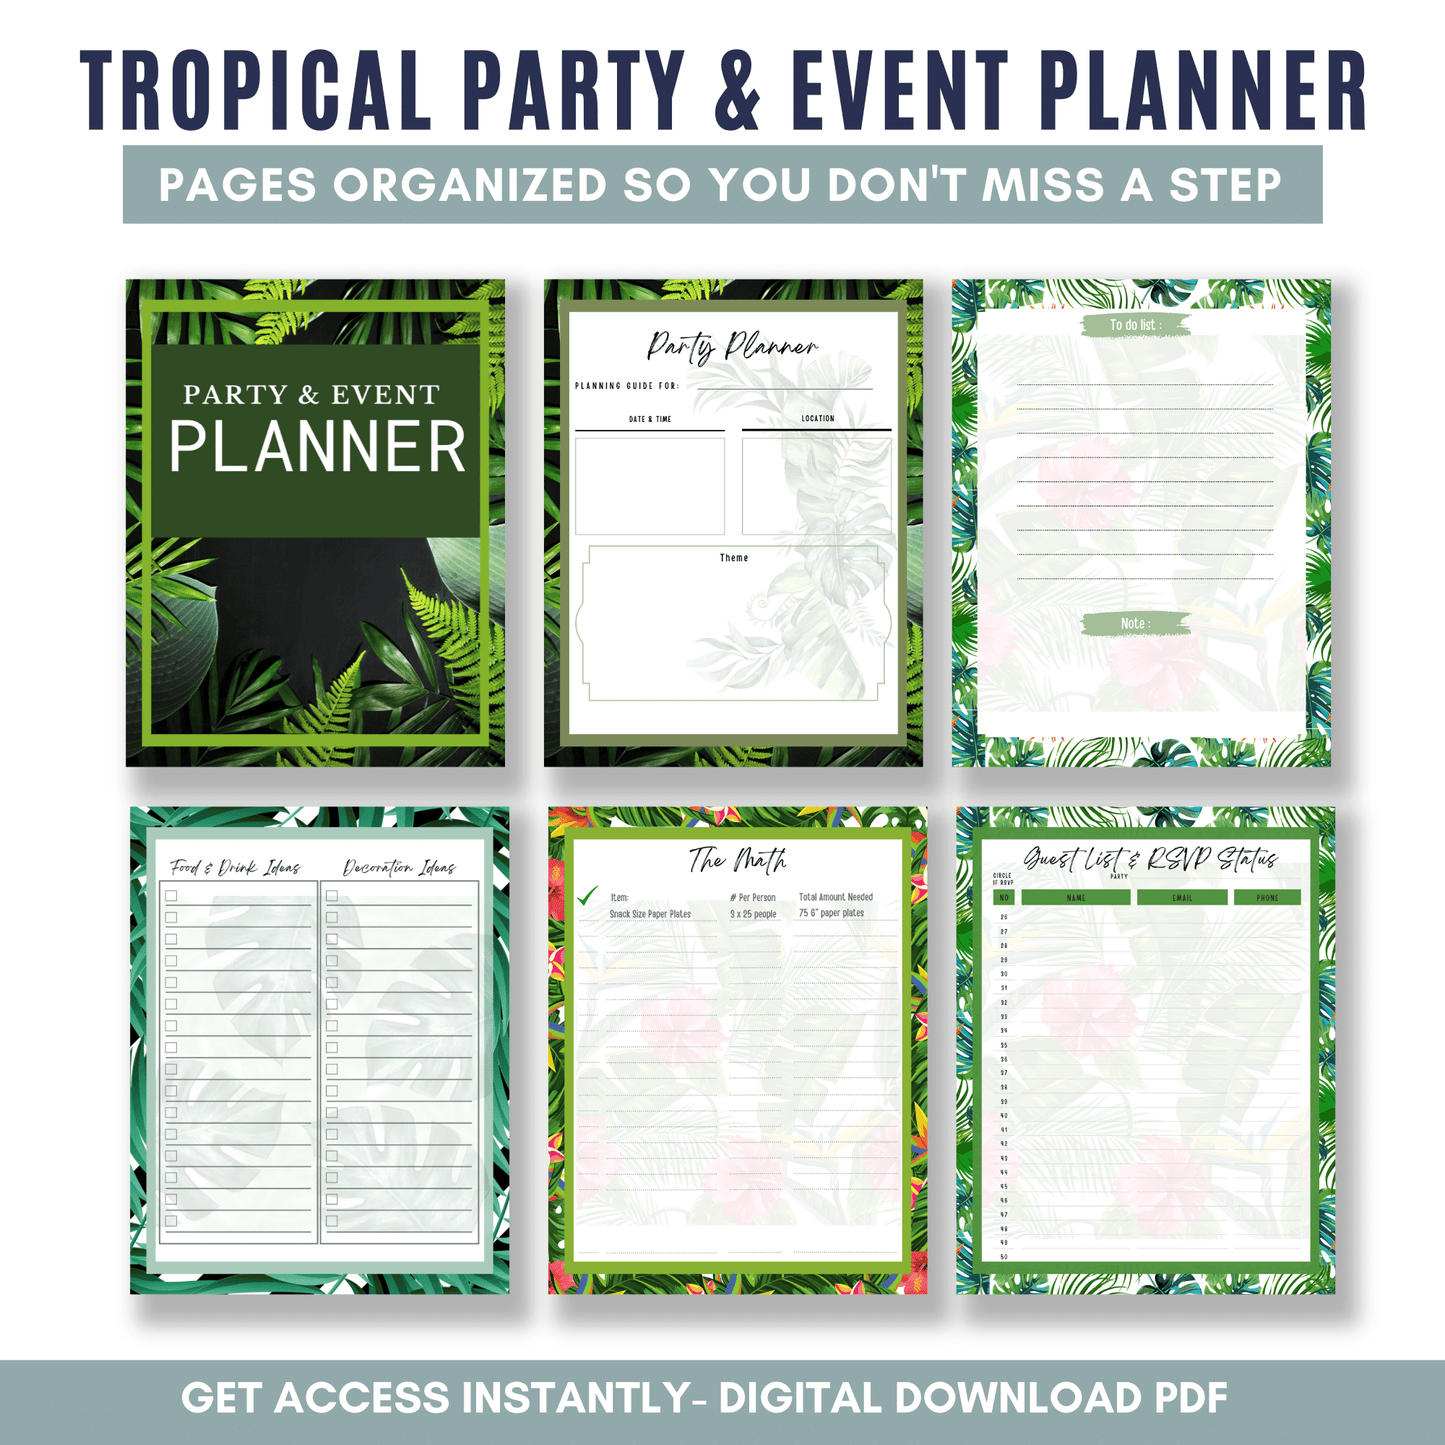 Tropical Party & Event Planner - Full Color Version